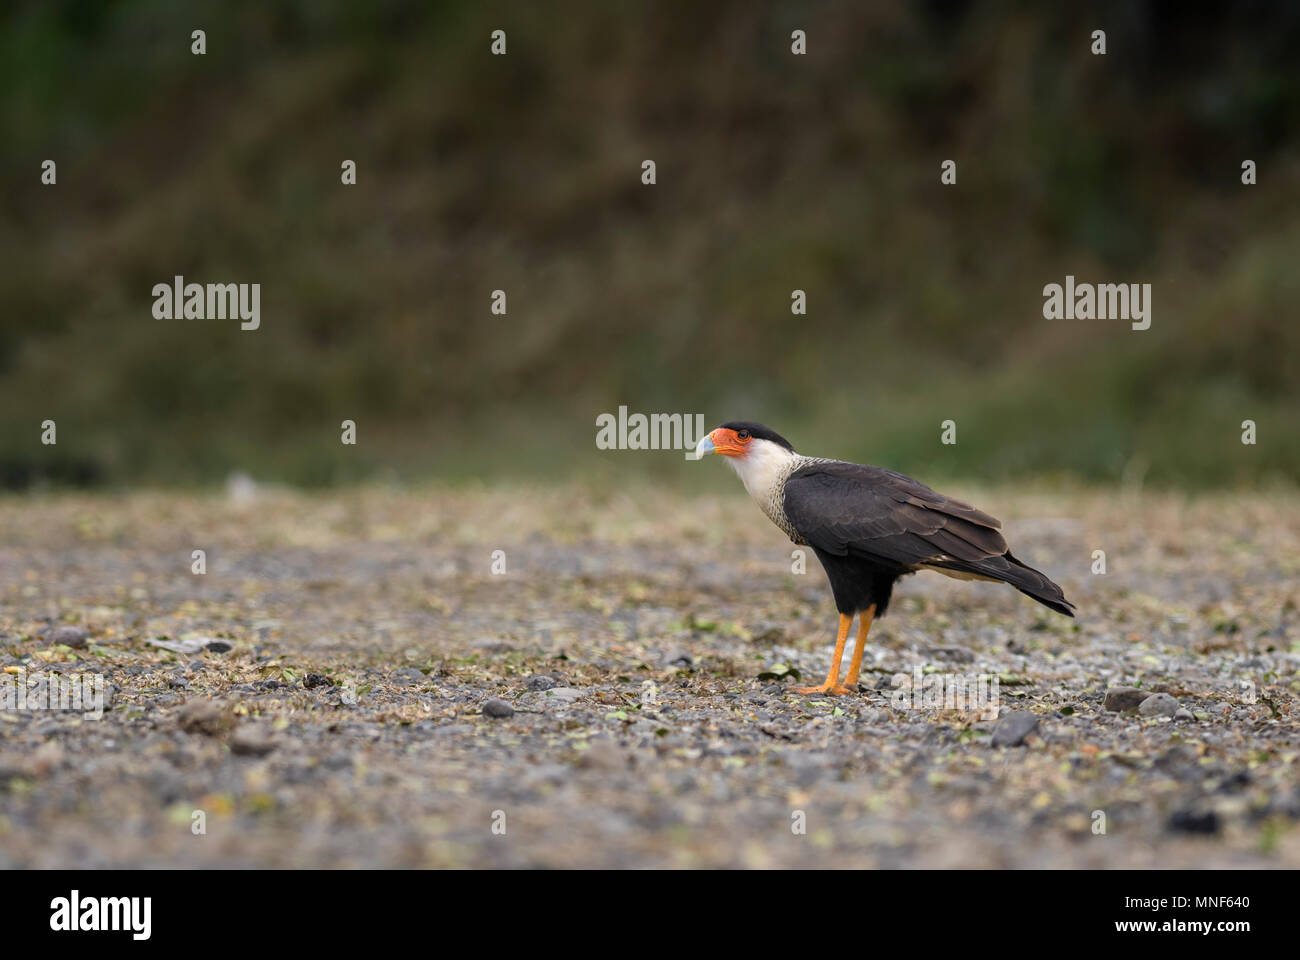 Crested Caracara - Caracara cheriway, beautiful raptor from New World forests, Costa Rica. Stock Photo